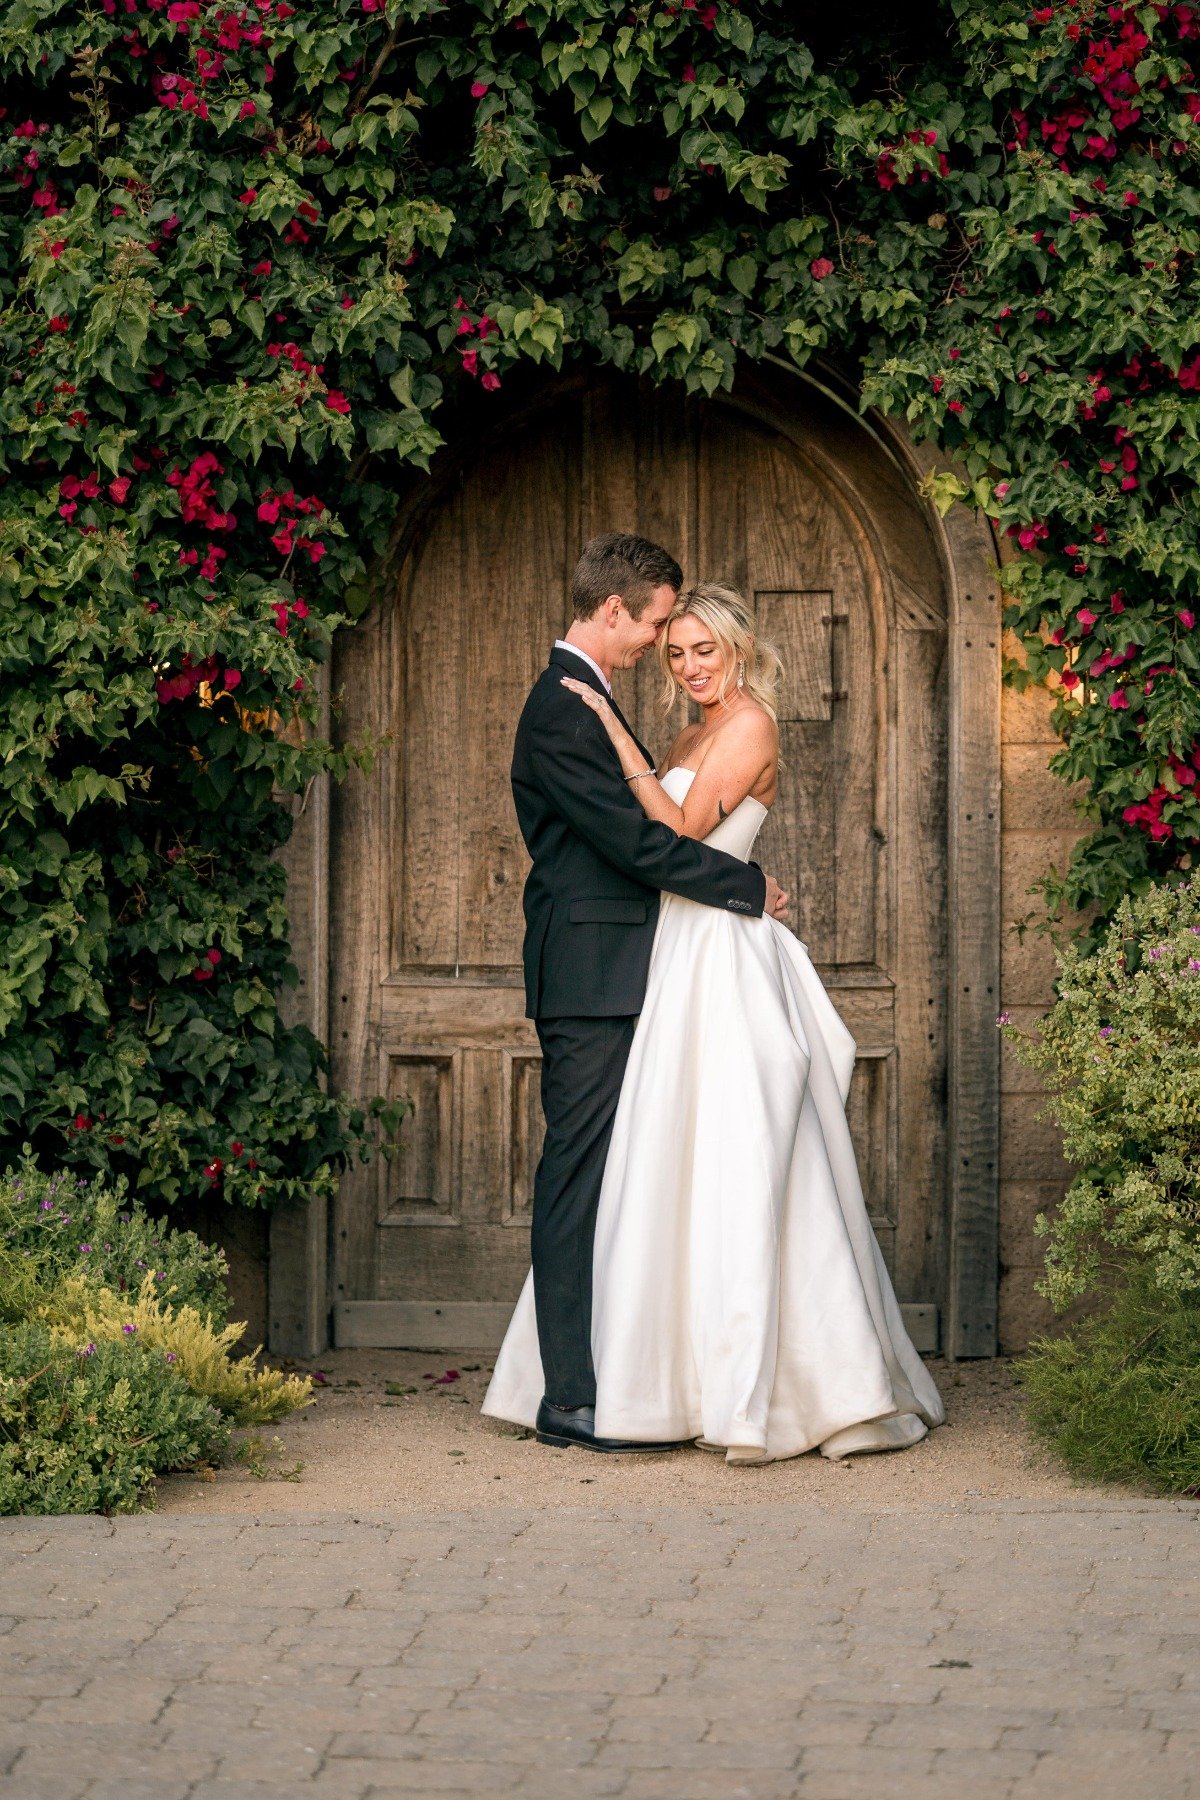 Portrait of bride and groom in front of wood door surrounded by greenery